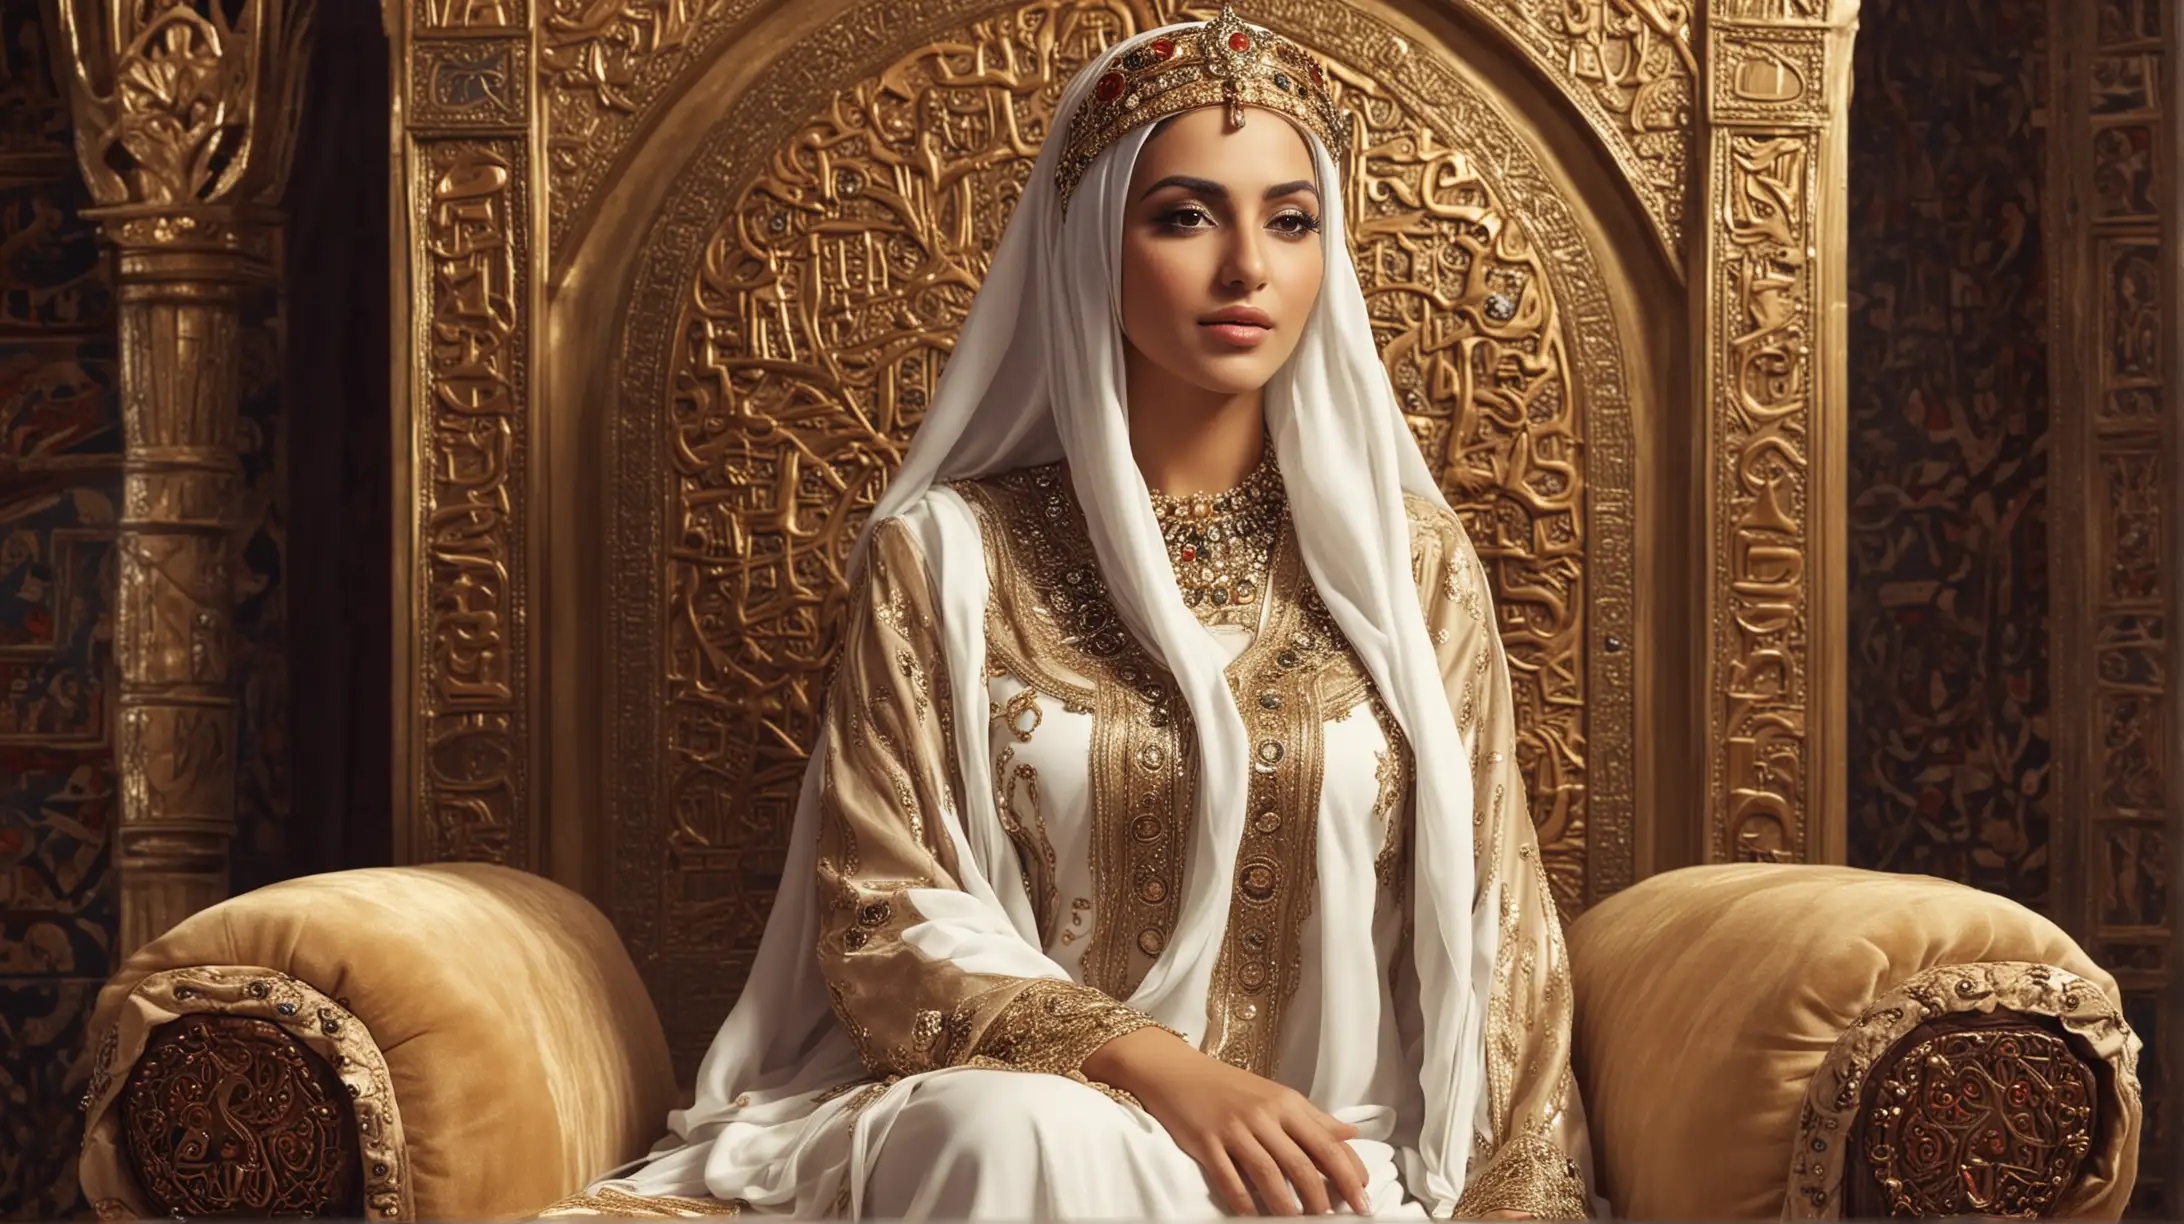 Arab Queen Sitting on the Throne